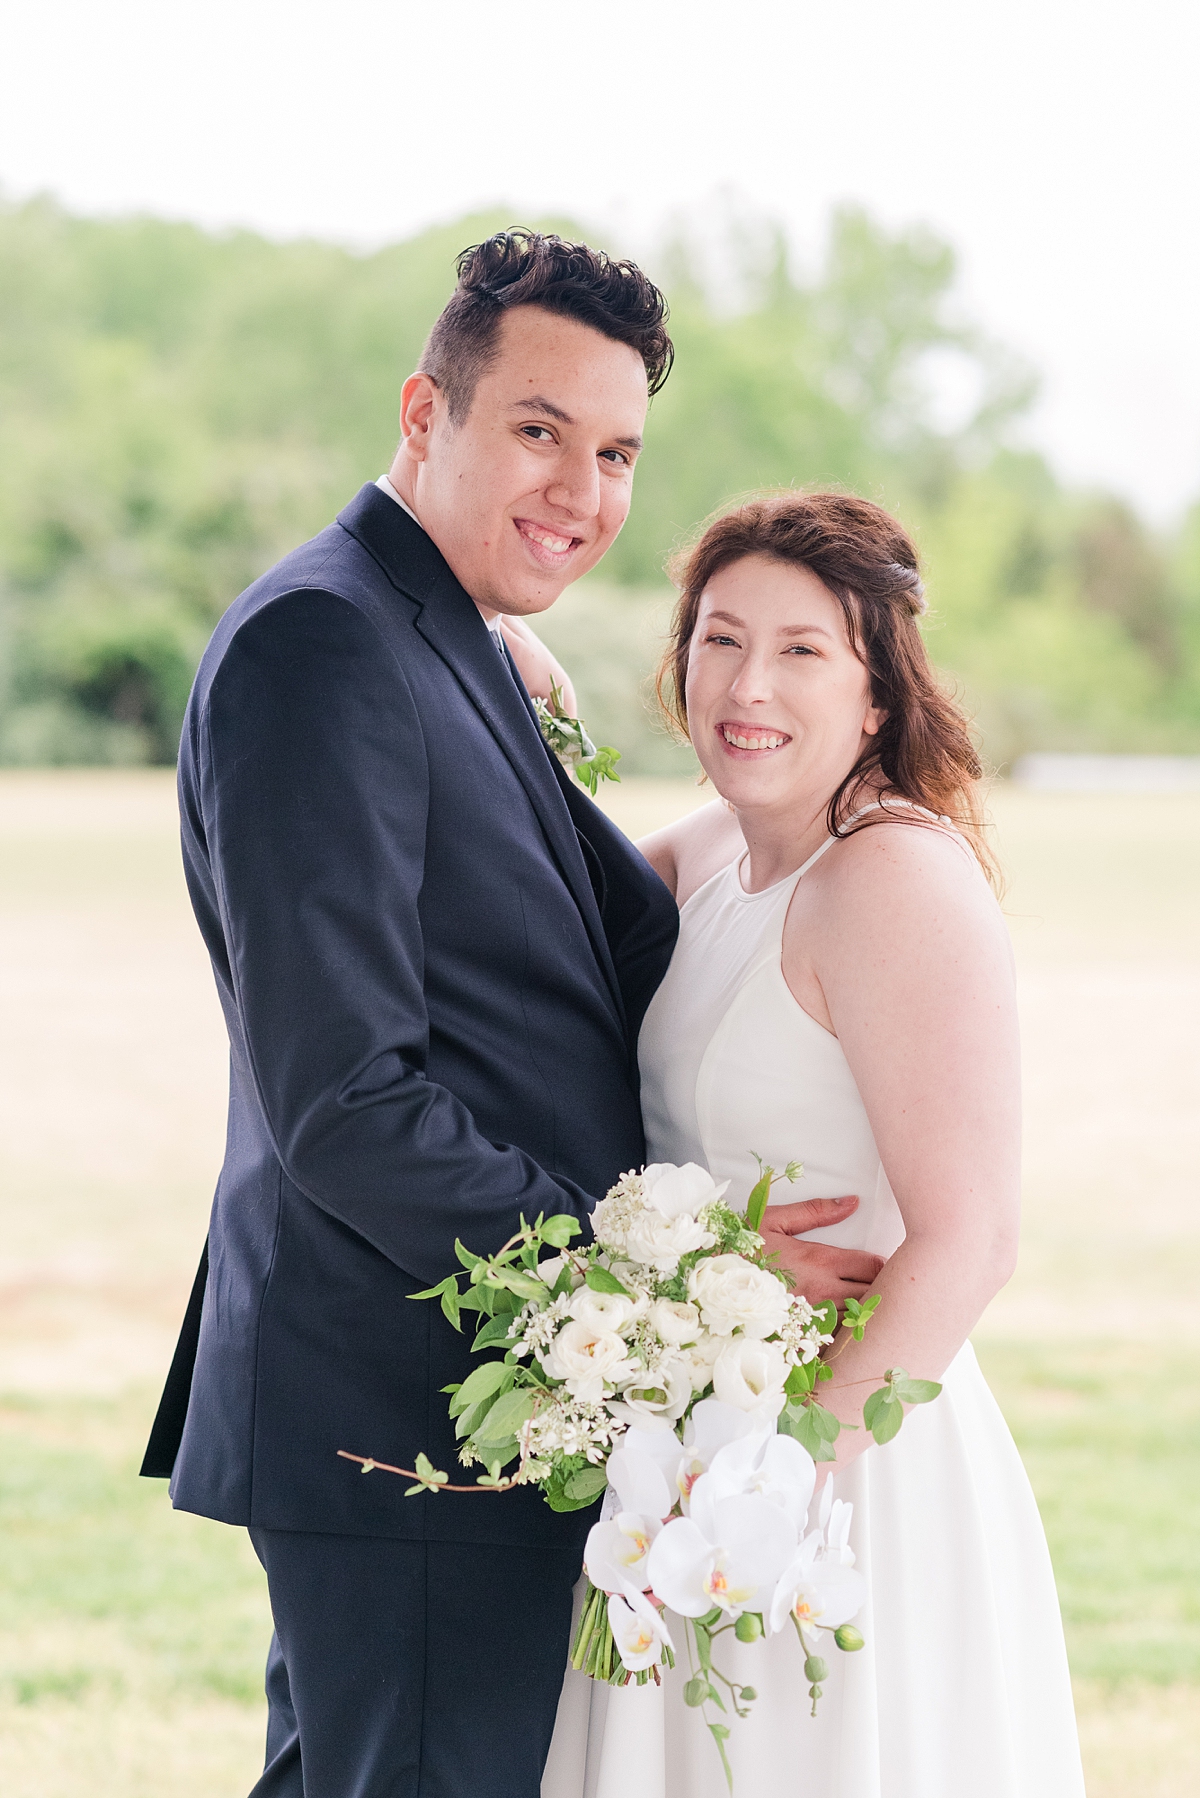 Wedding Portraits at Hanover Courthouse Park by Richmond Wedding Photographer Kailey Brianne Photography. 